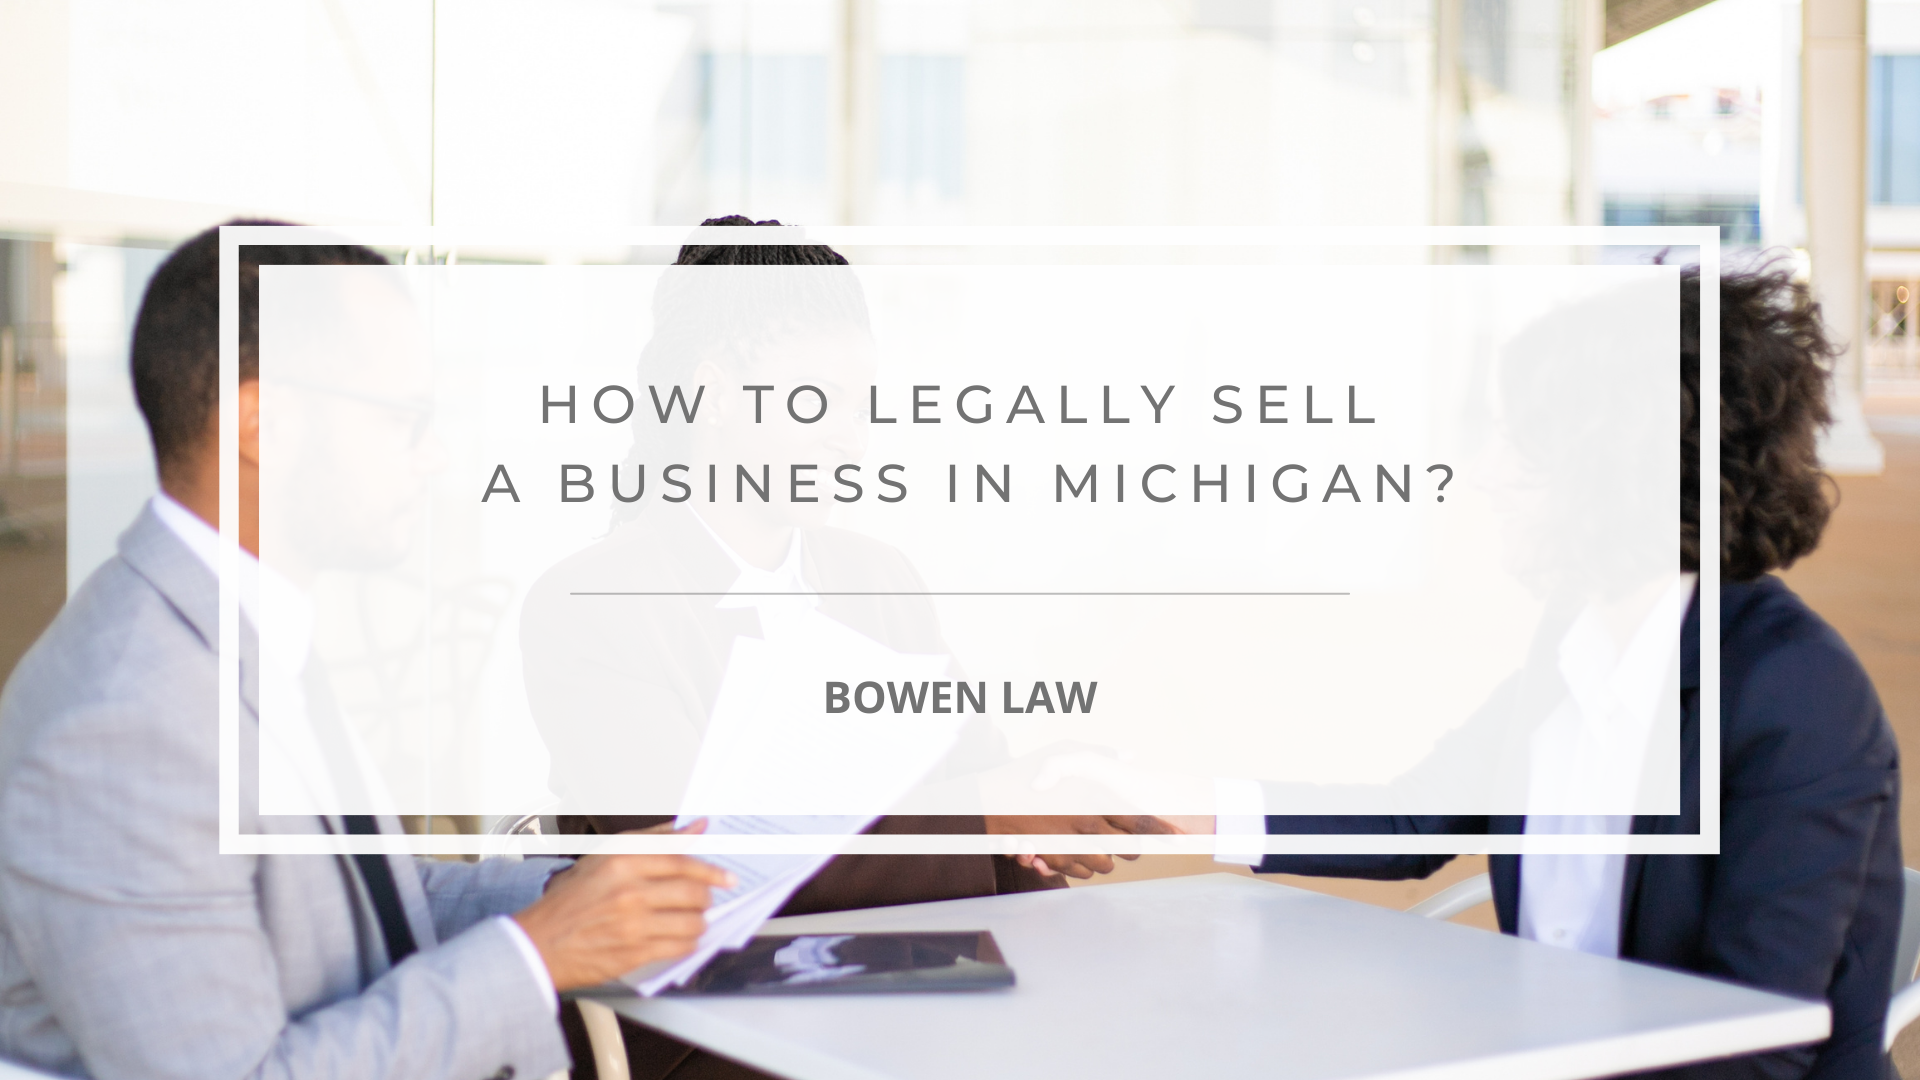 Featured Image of how to legally sell a business in michigan?